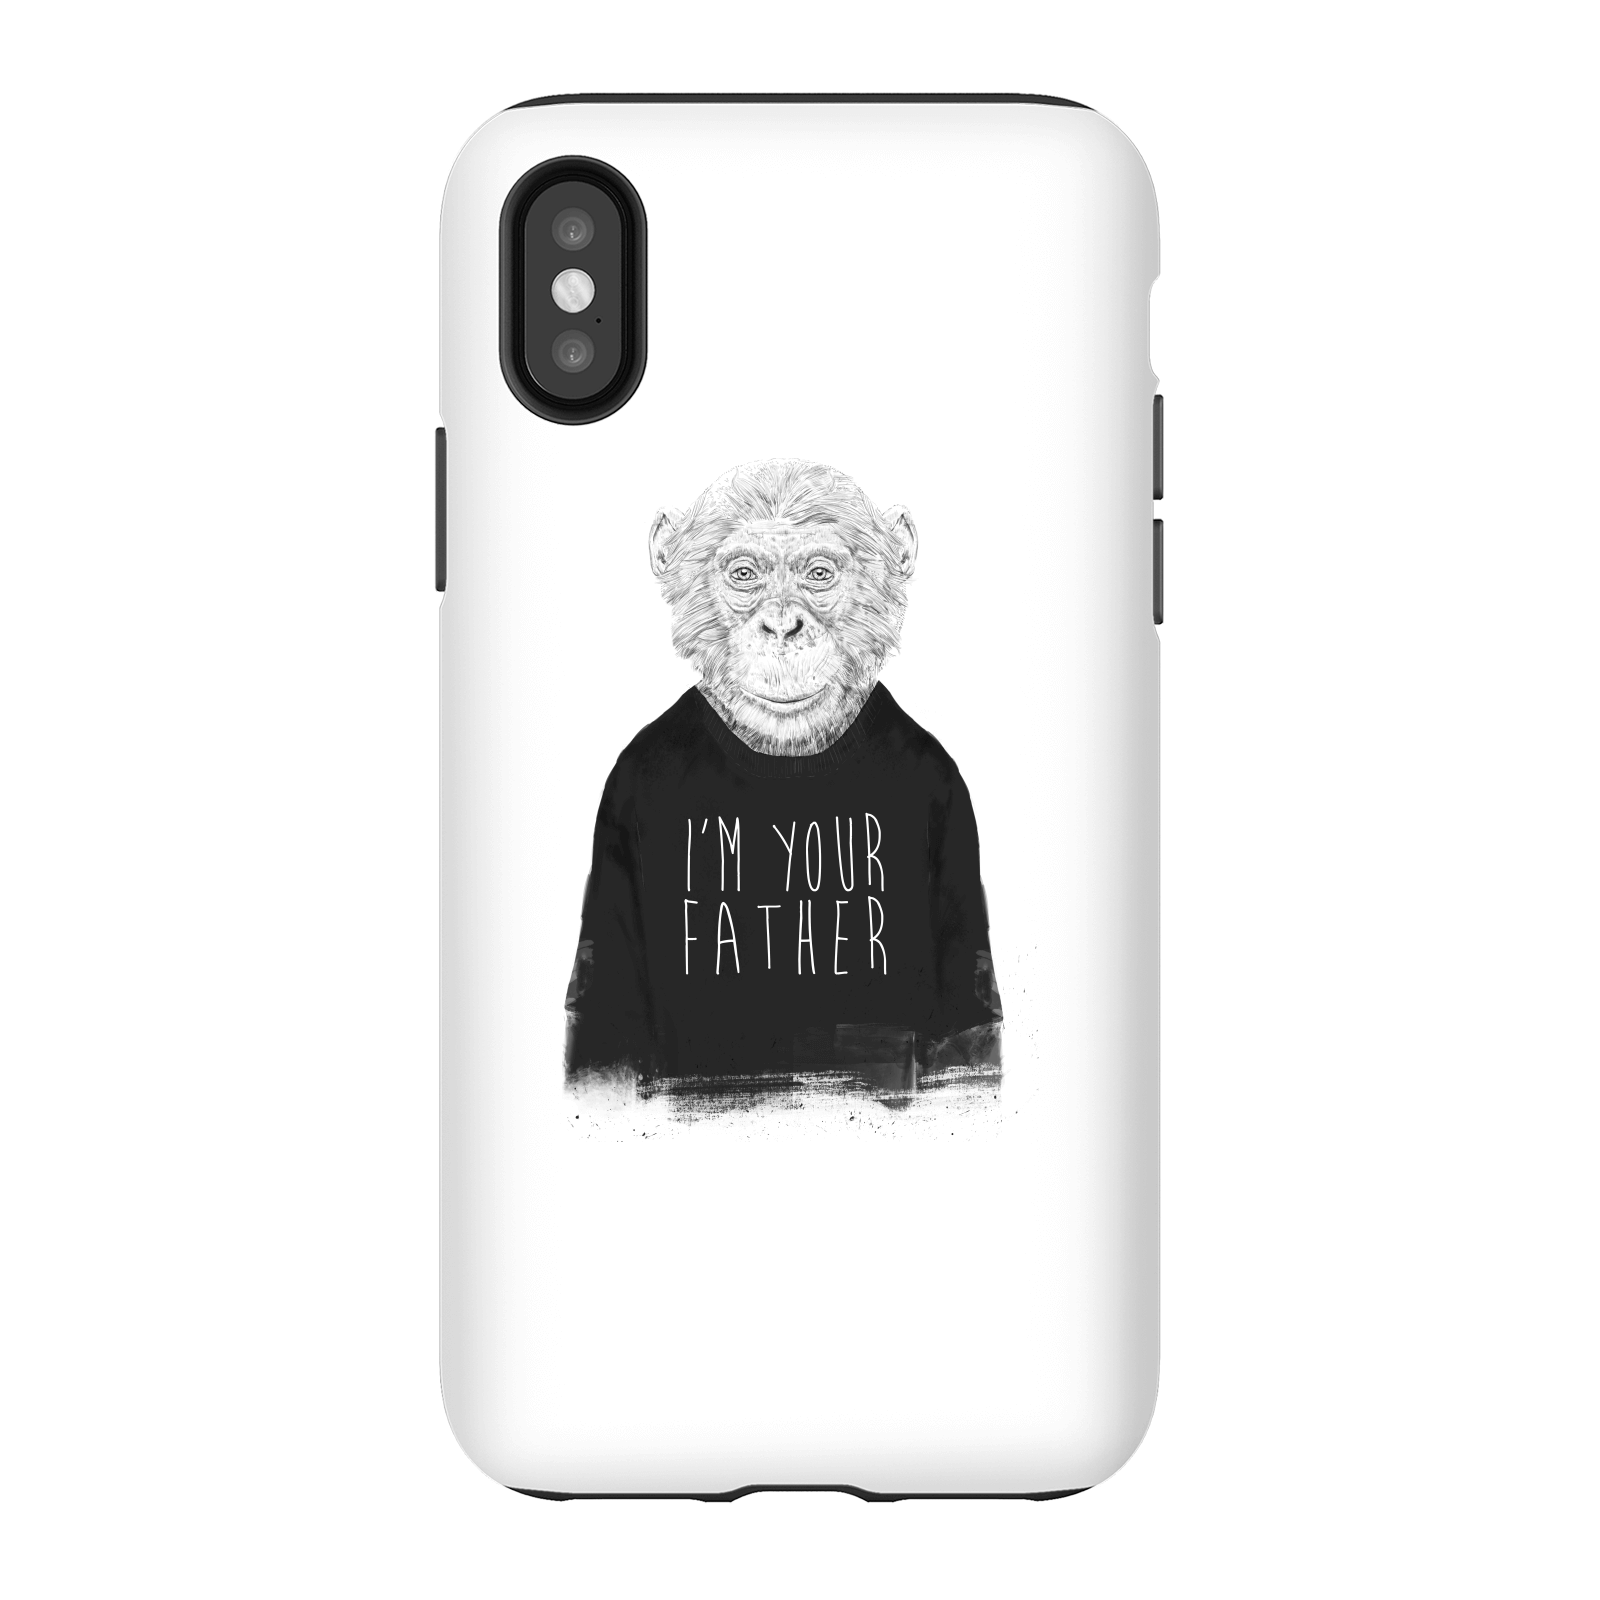 Balazs Solti I'm Your Father Phone Case for iPhone and Android - iPhone X - Tough Case - Gloss